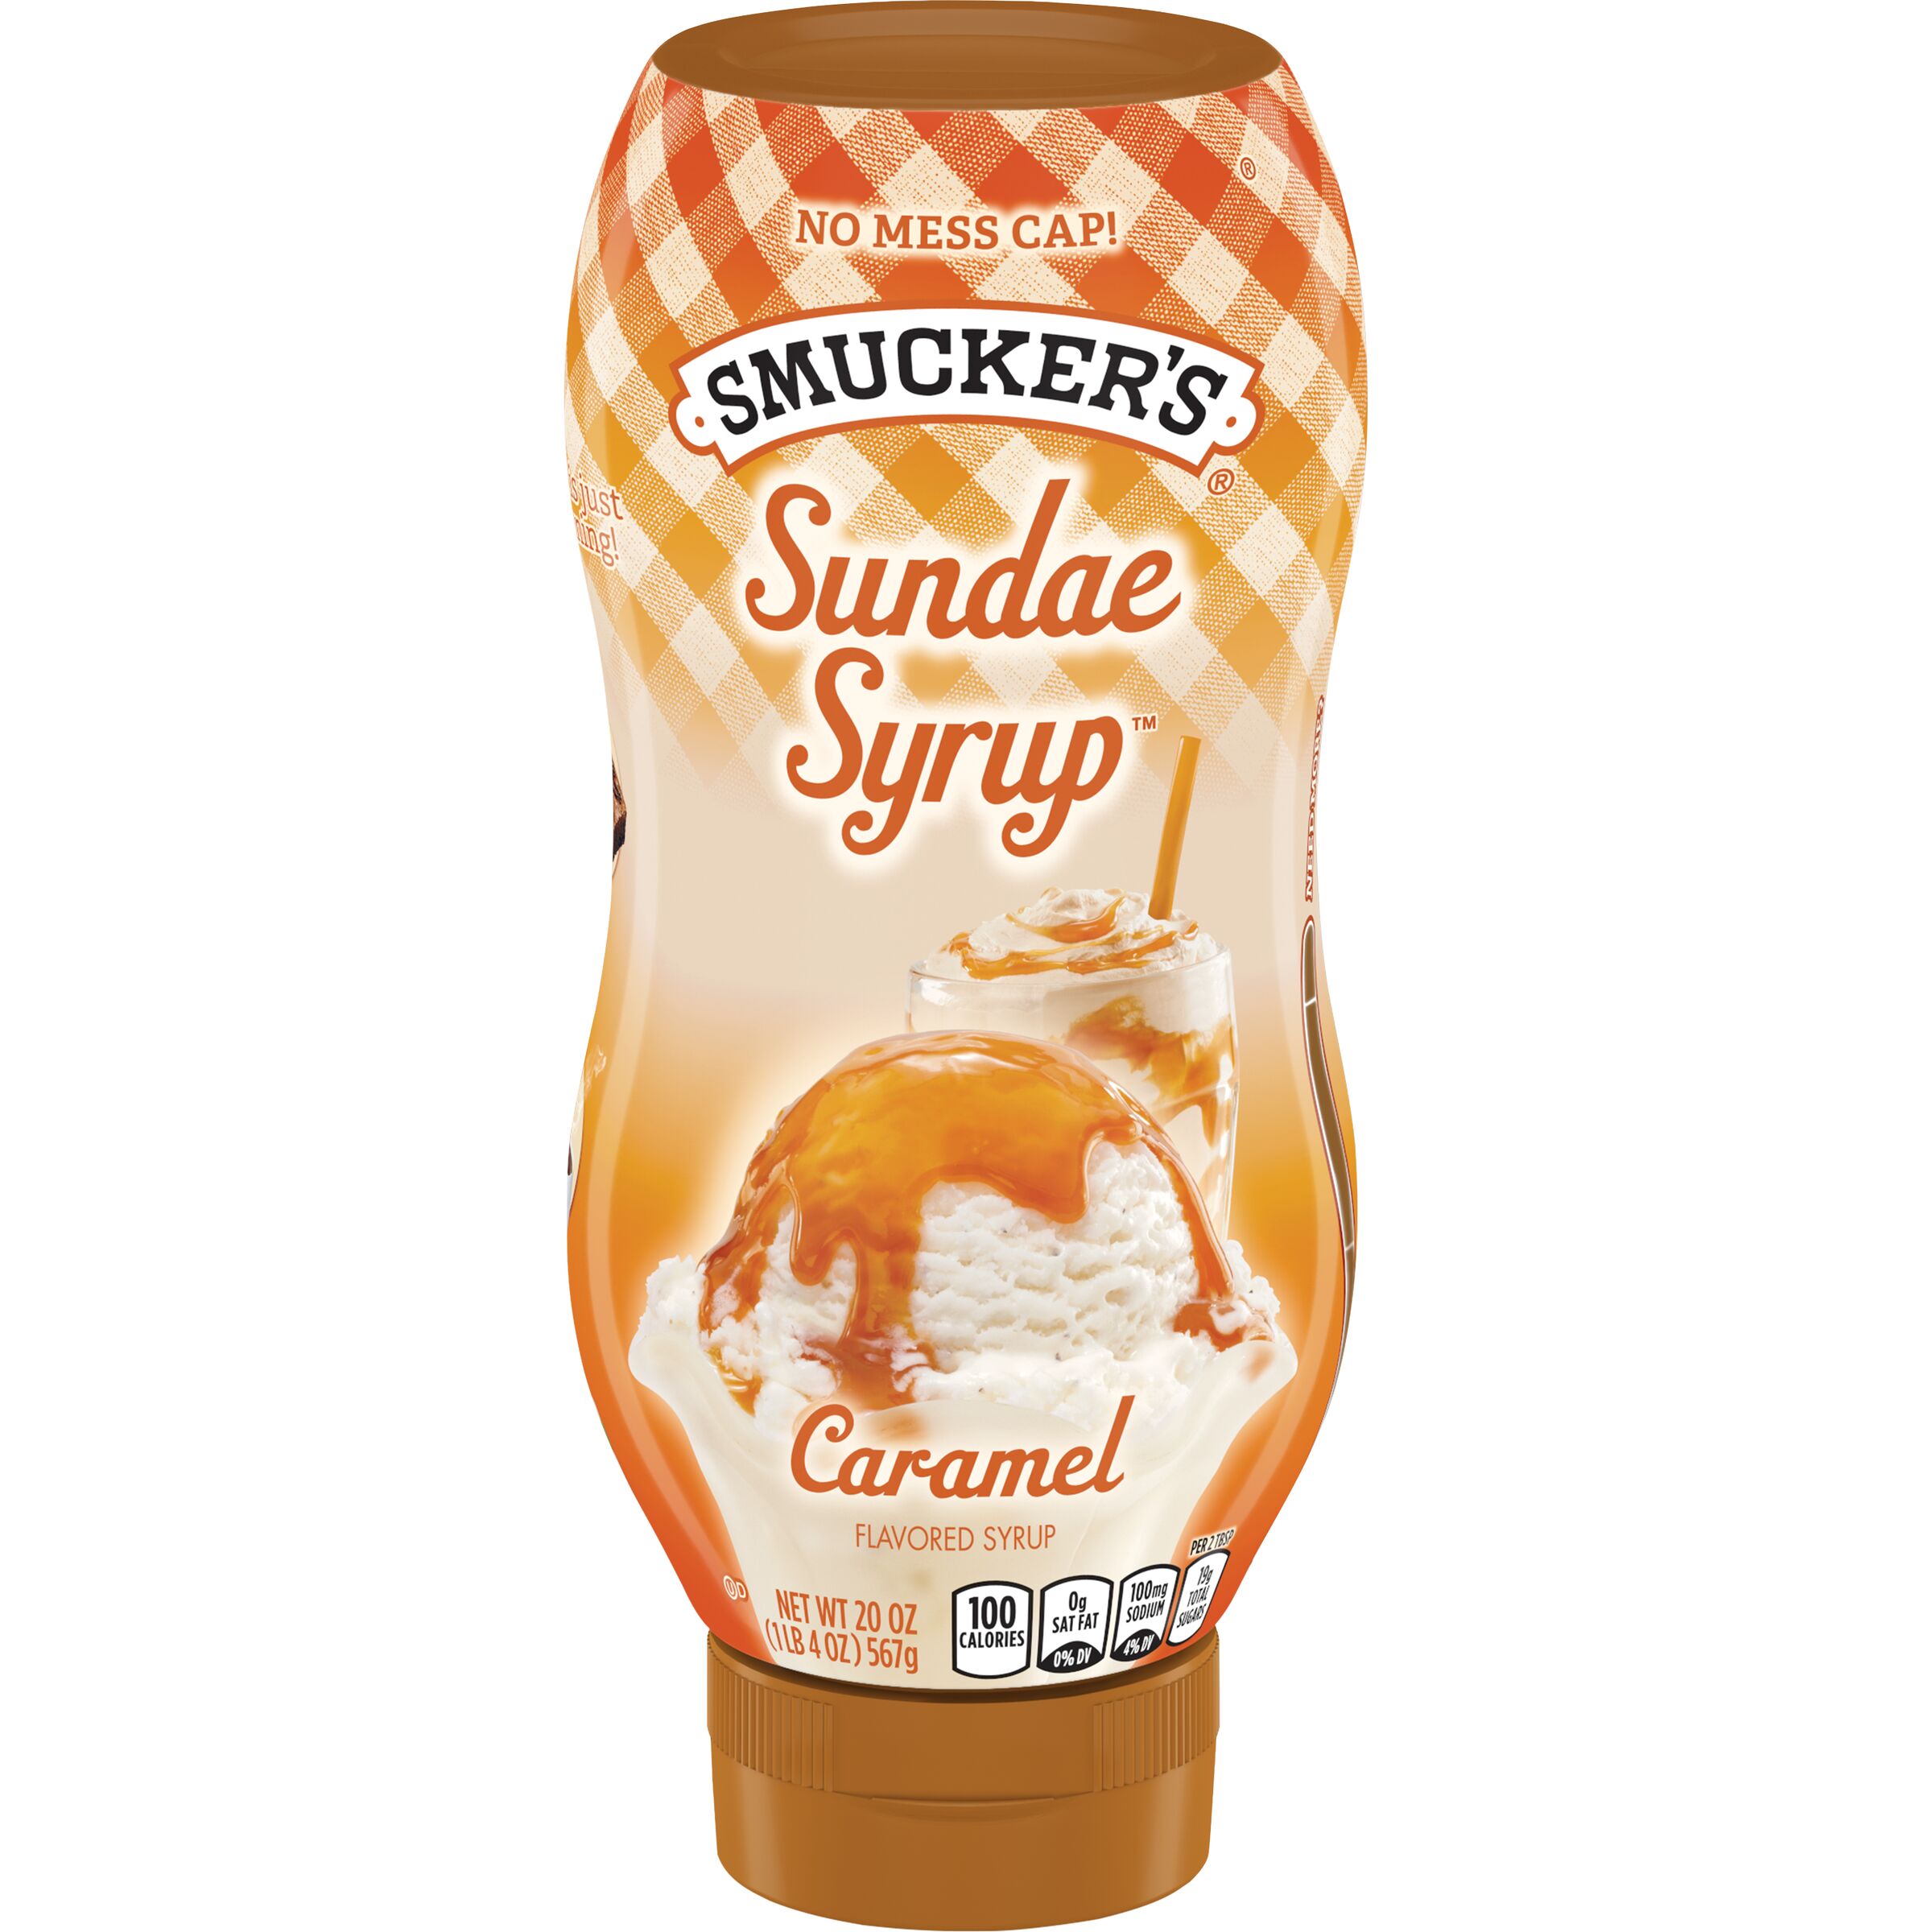 Smucker's Sundae Syrup Caramel Flavored Syrup, 20 Ounces - image 1 of 7